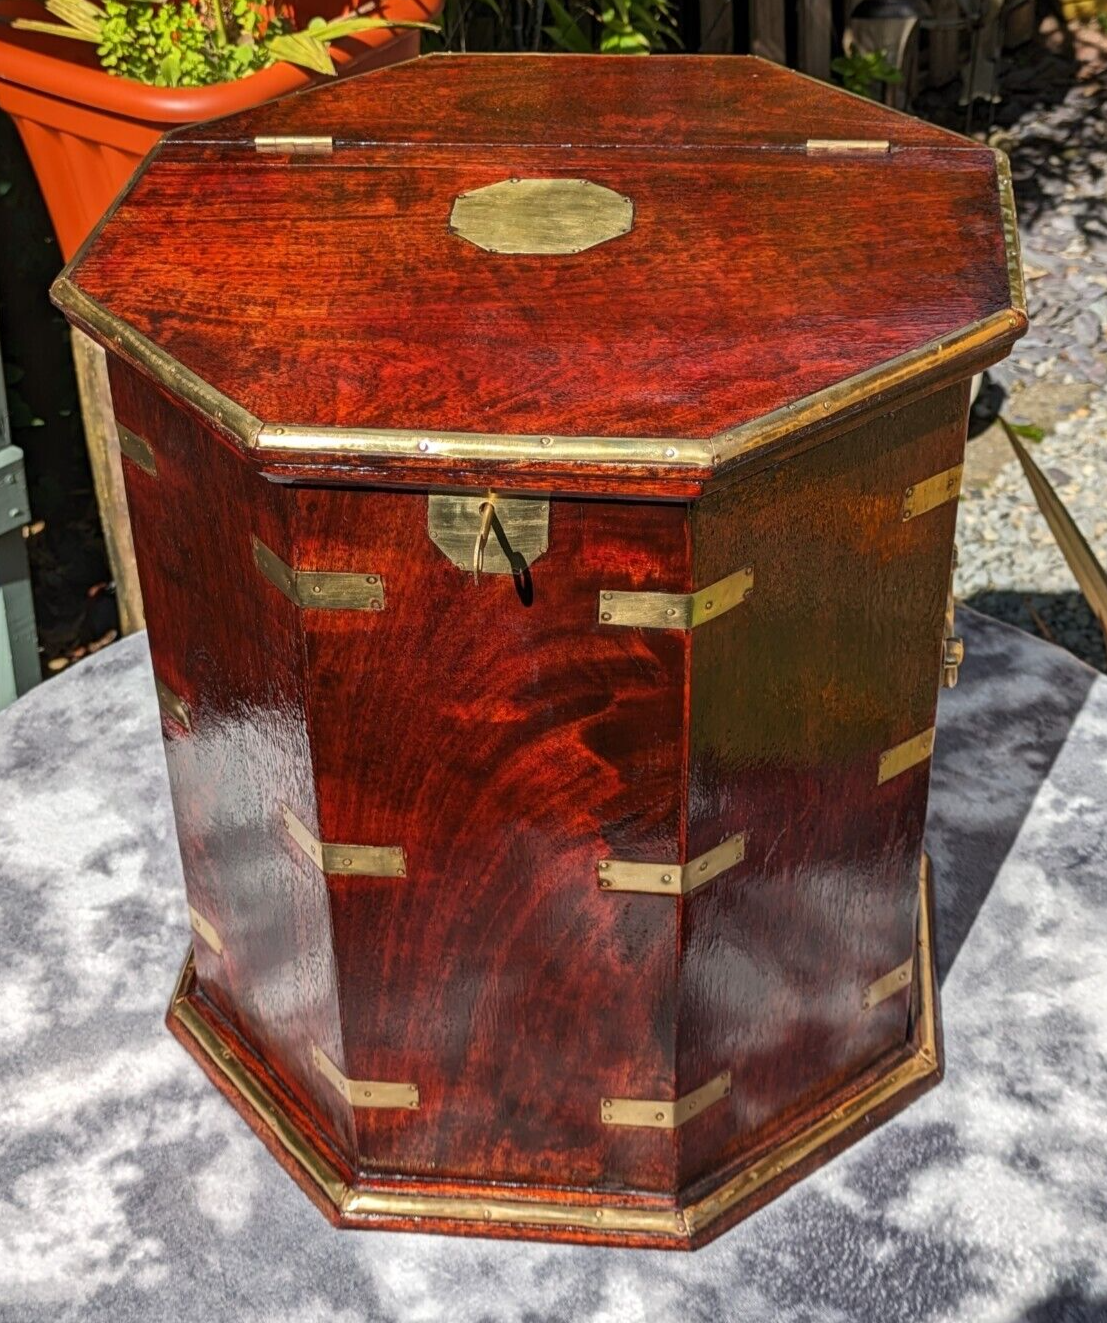 19th Century English Antique Octagonal Mahogany Brass Antique Campaign Table Box